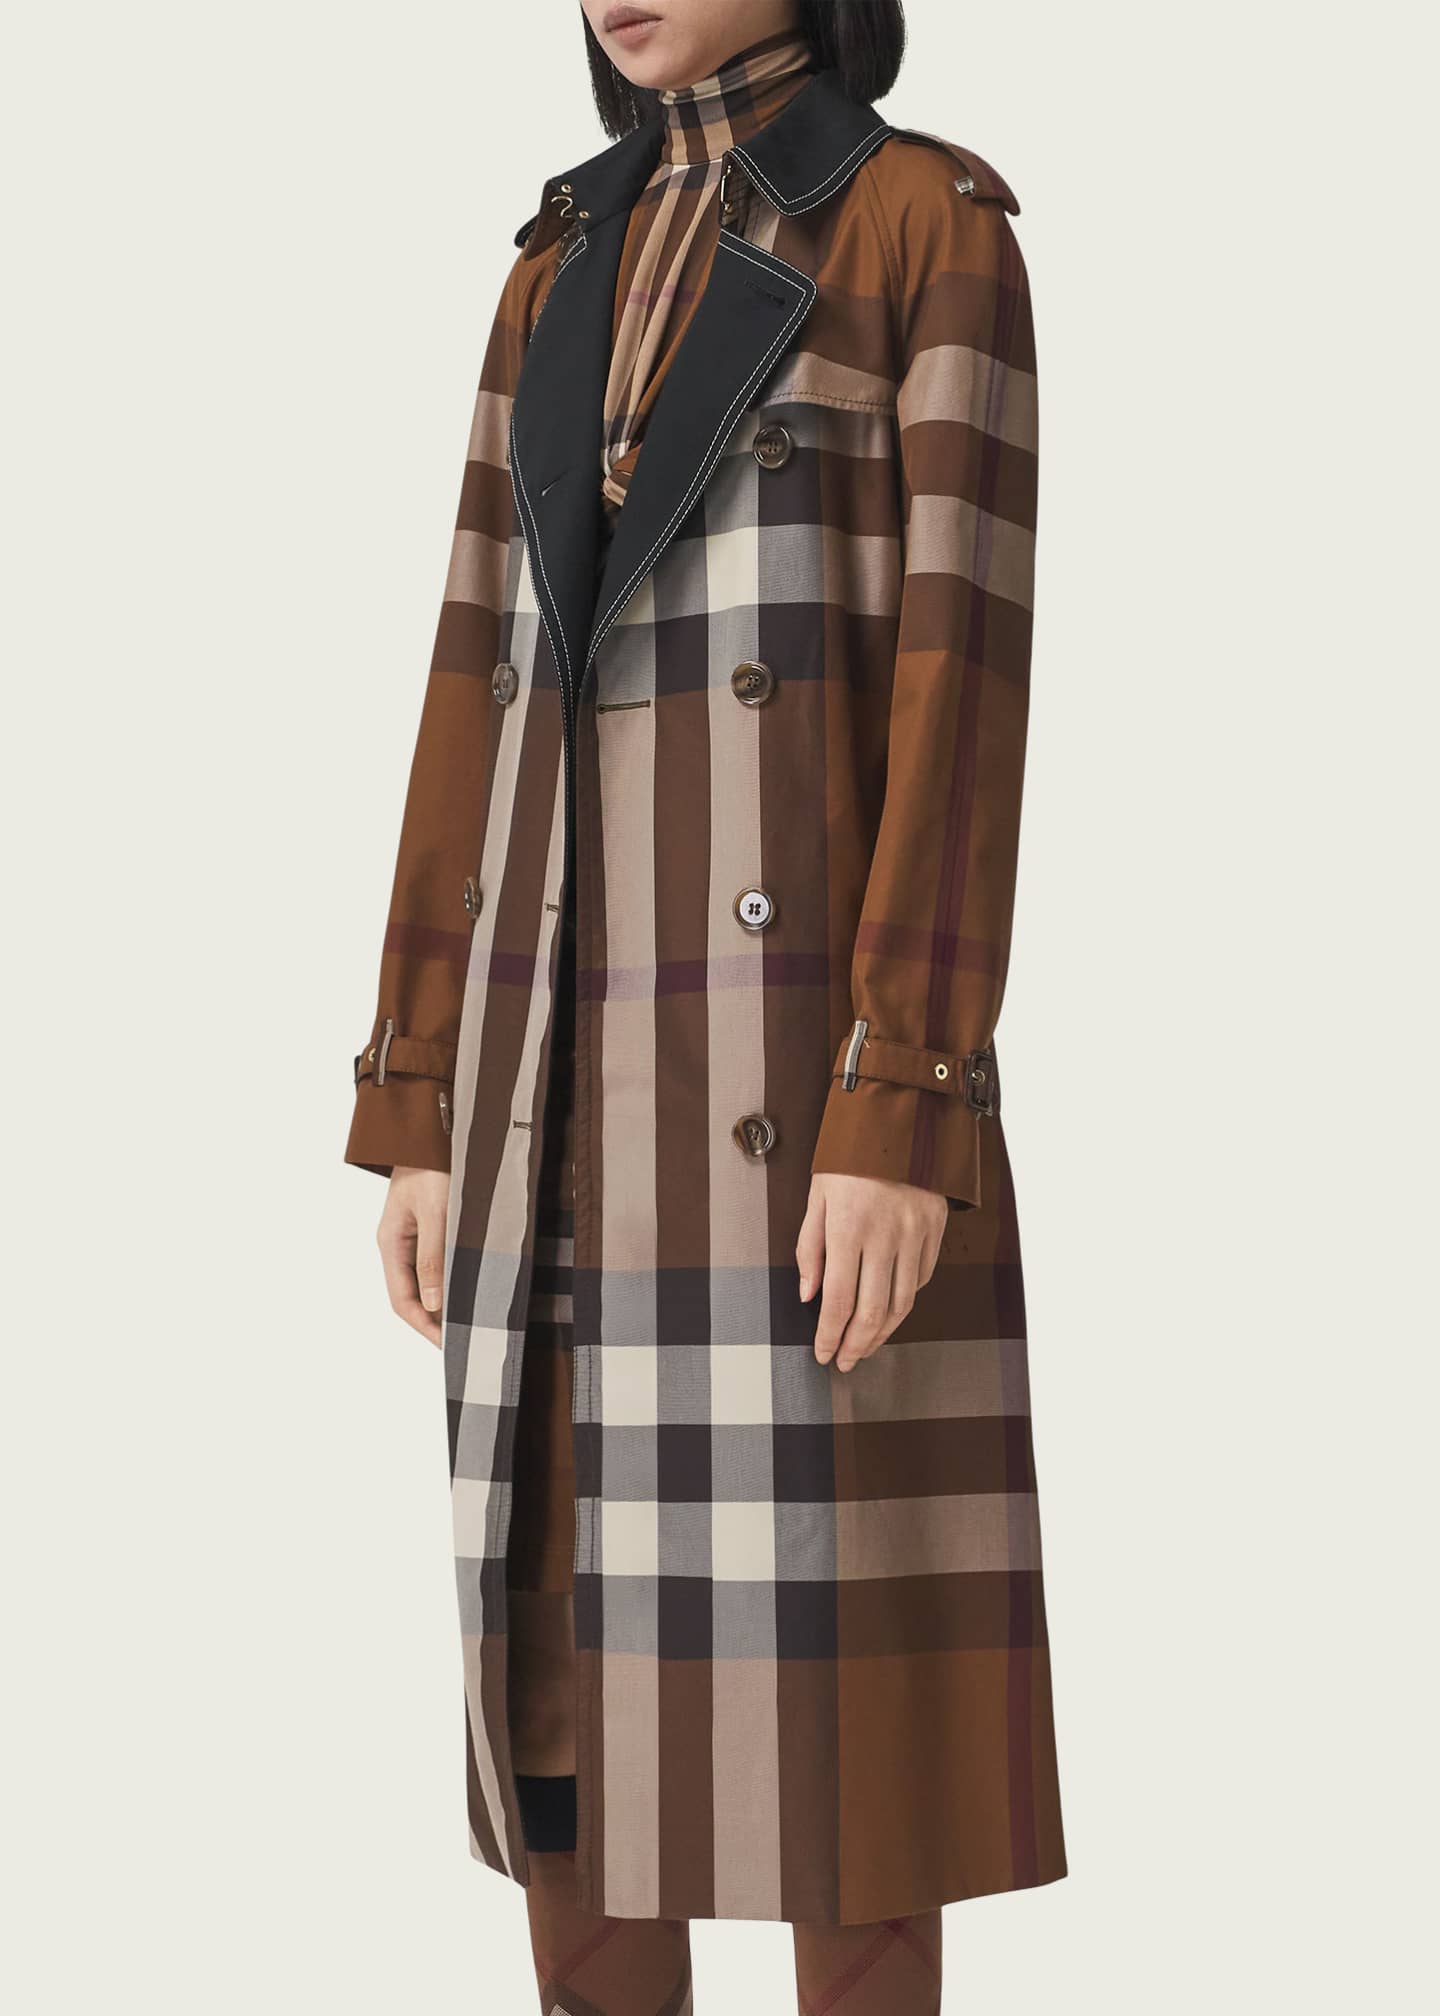 Burberry Waterloo Check-Print Double-Breasted Trench Coat - Bergdorf Goodman